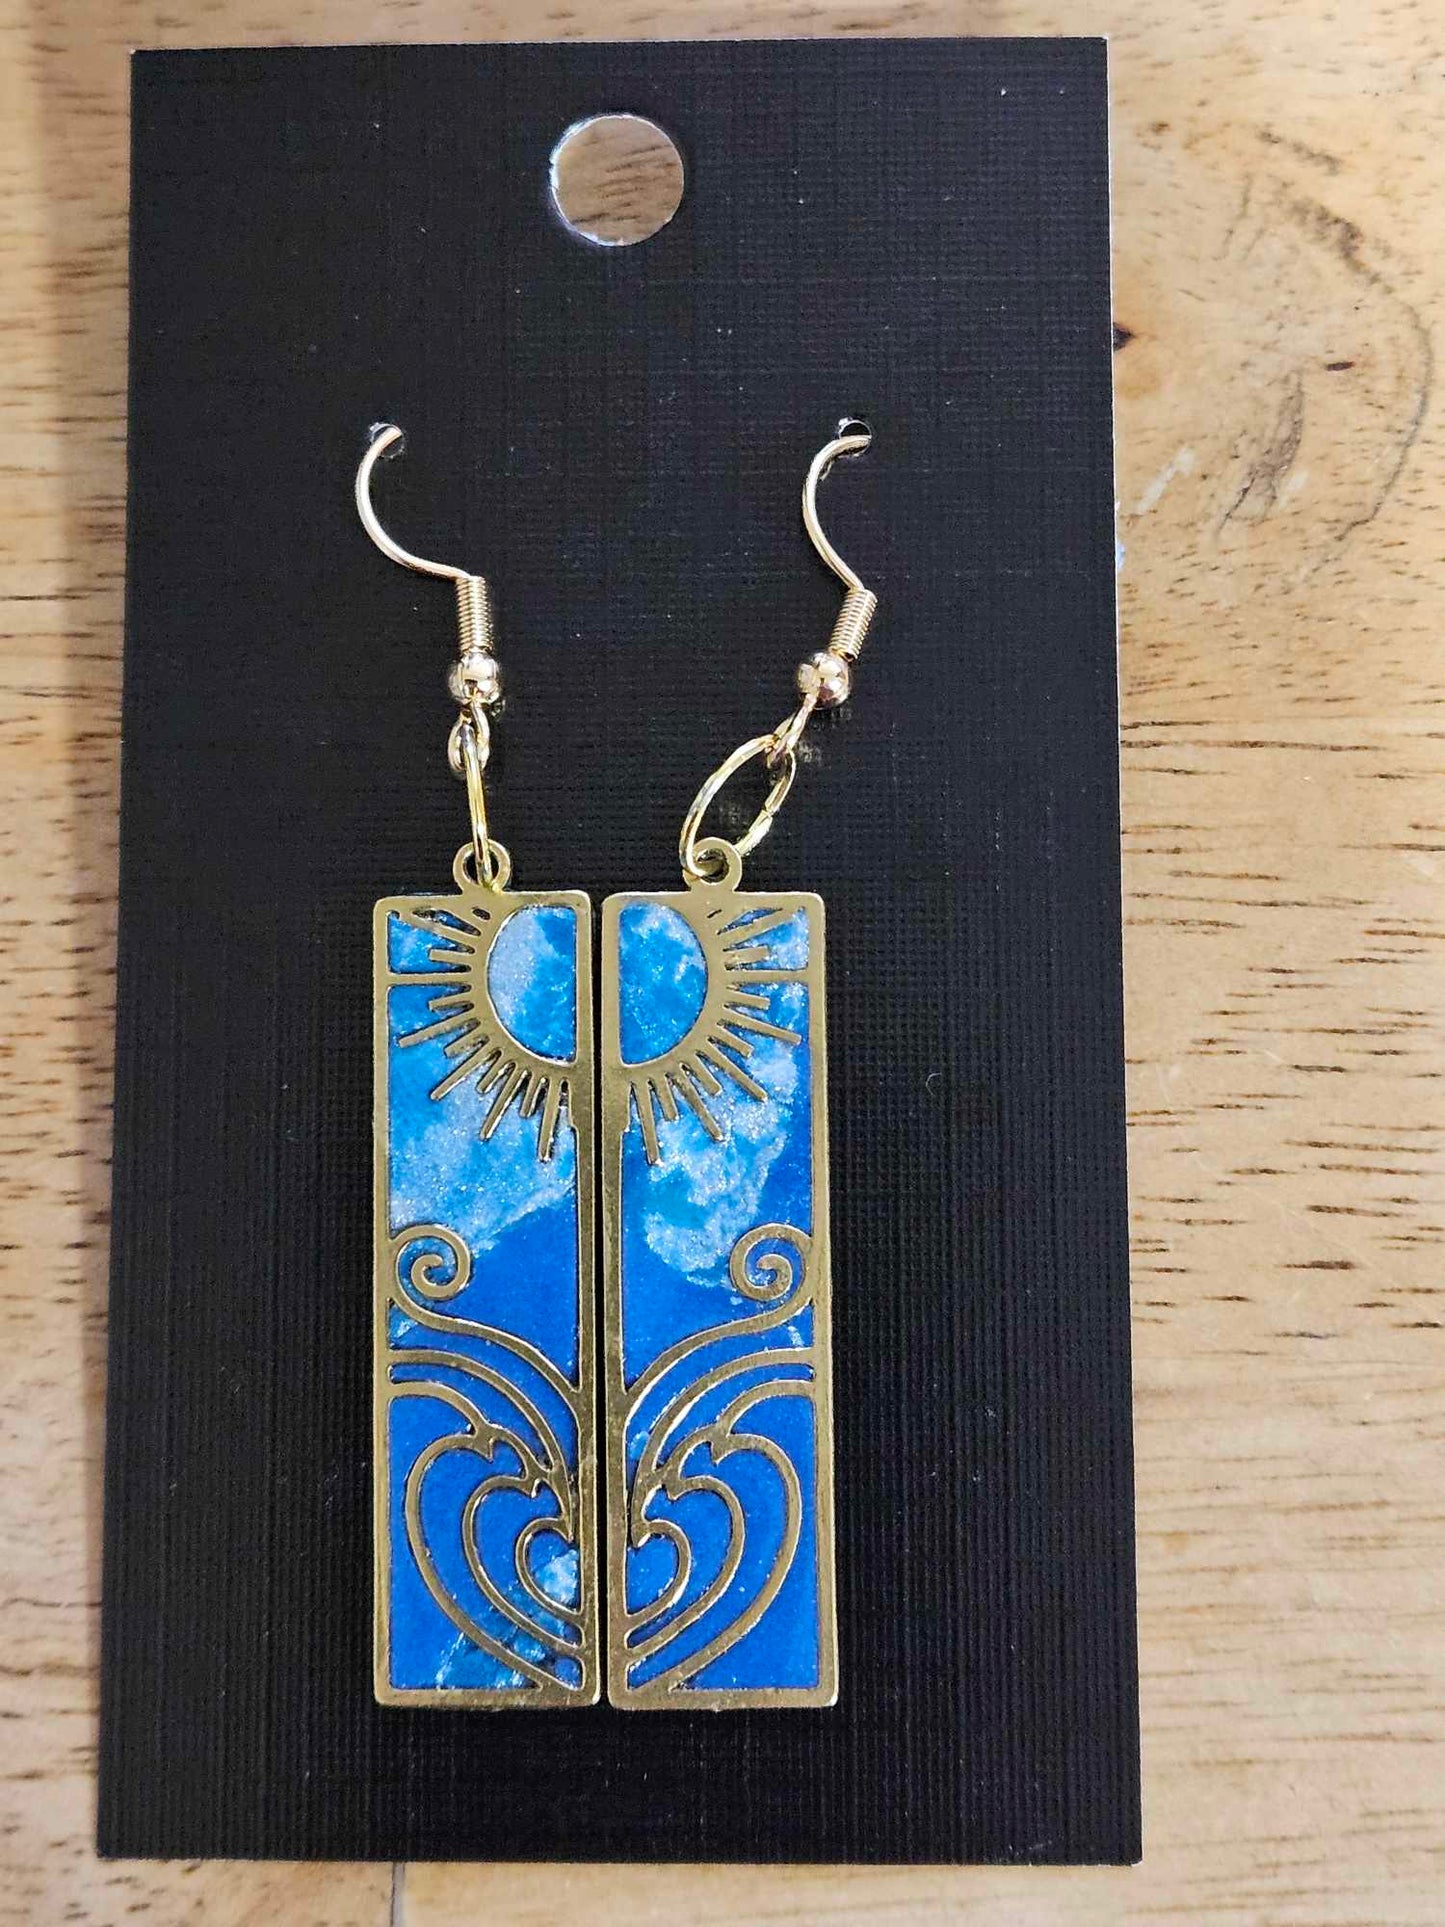 Spring Clay Earrings By Local Artist